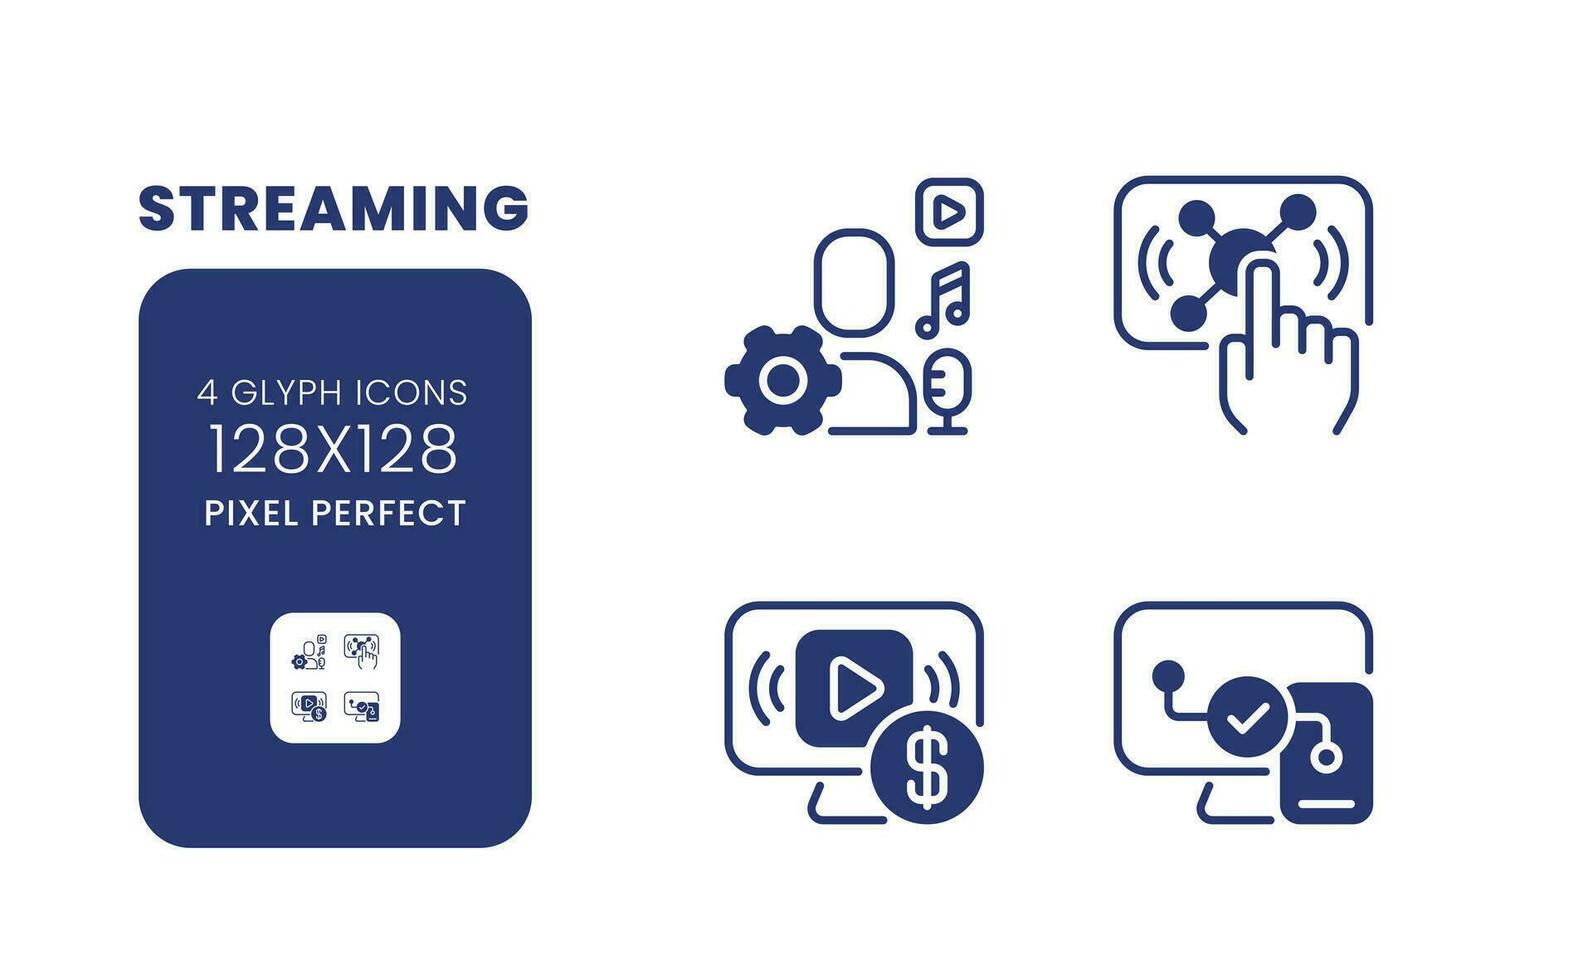 Streaming black solid desktop icons pack. Live interactive content. Digital marketing. Smart TV. Pixel perfect 128x128, outline 4px. Symbols on white space. Glyph pictograms. Isolated vector images